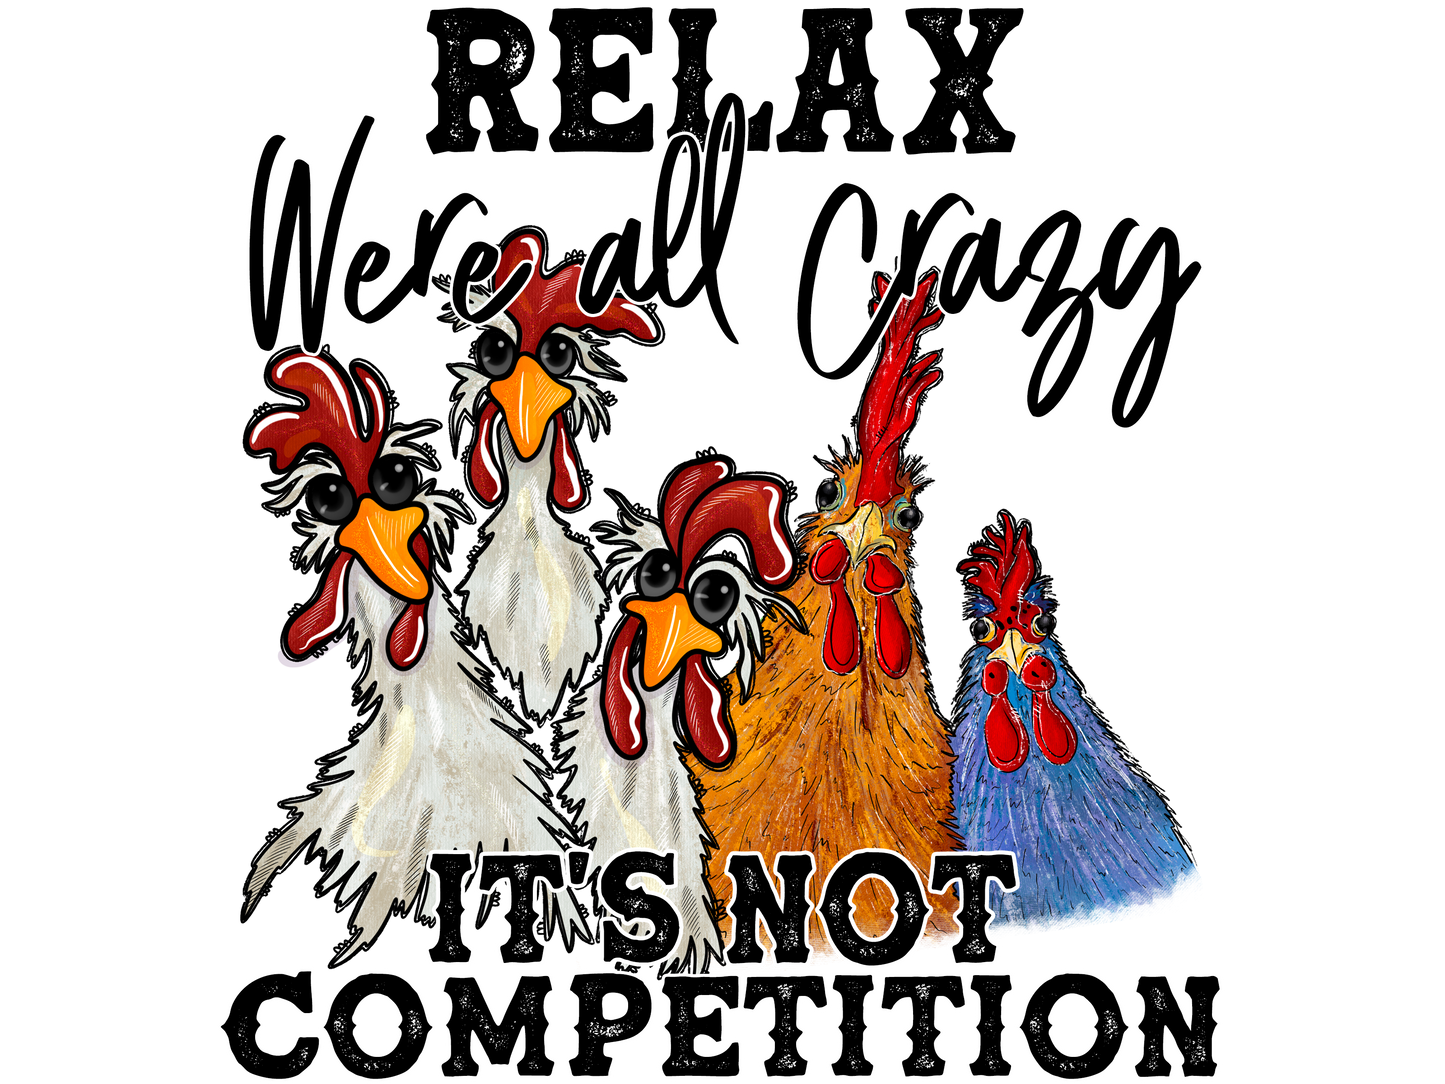 Relax we are all Crazy Chickens